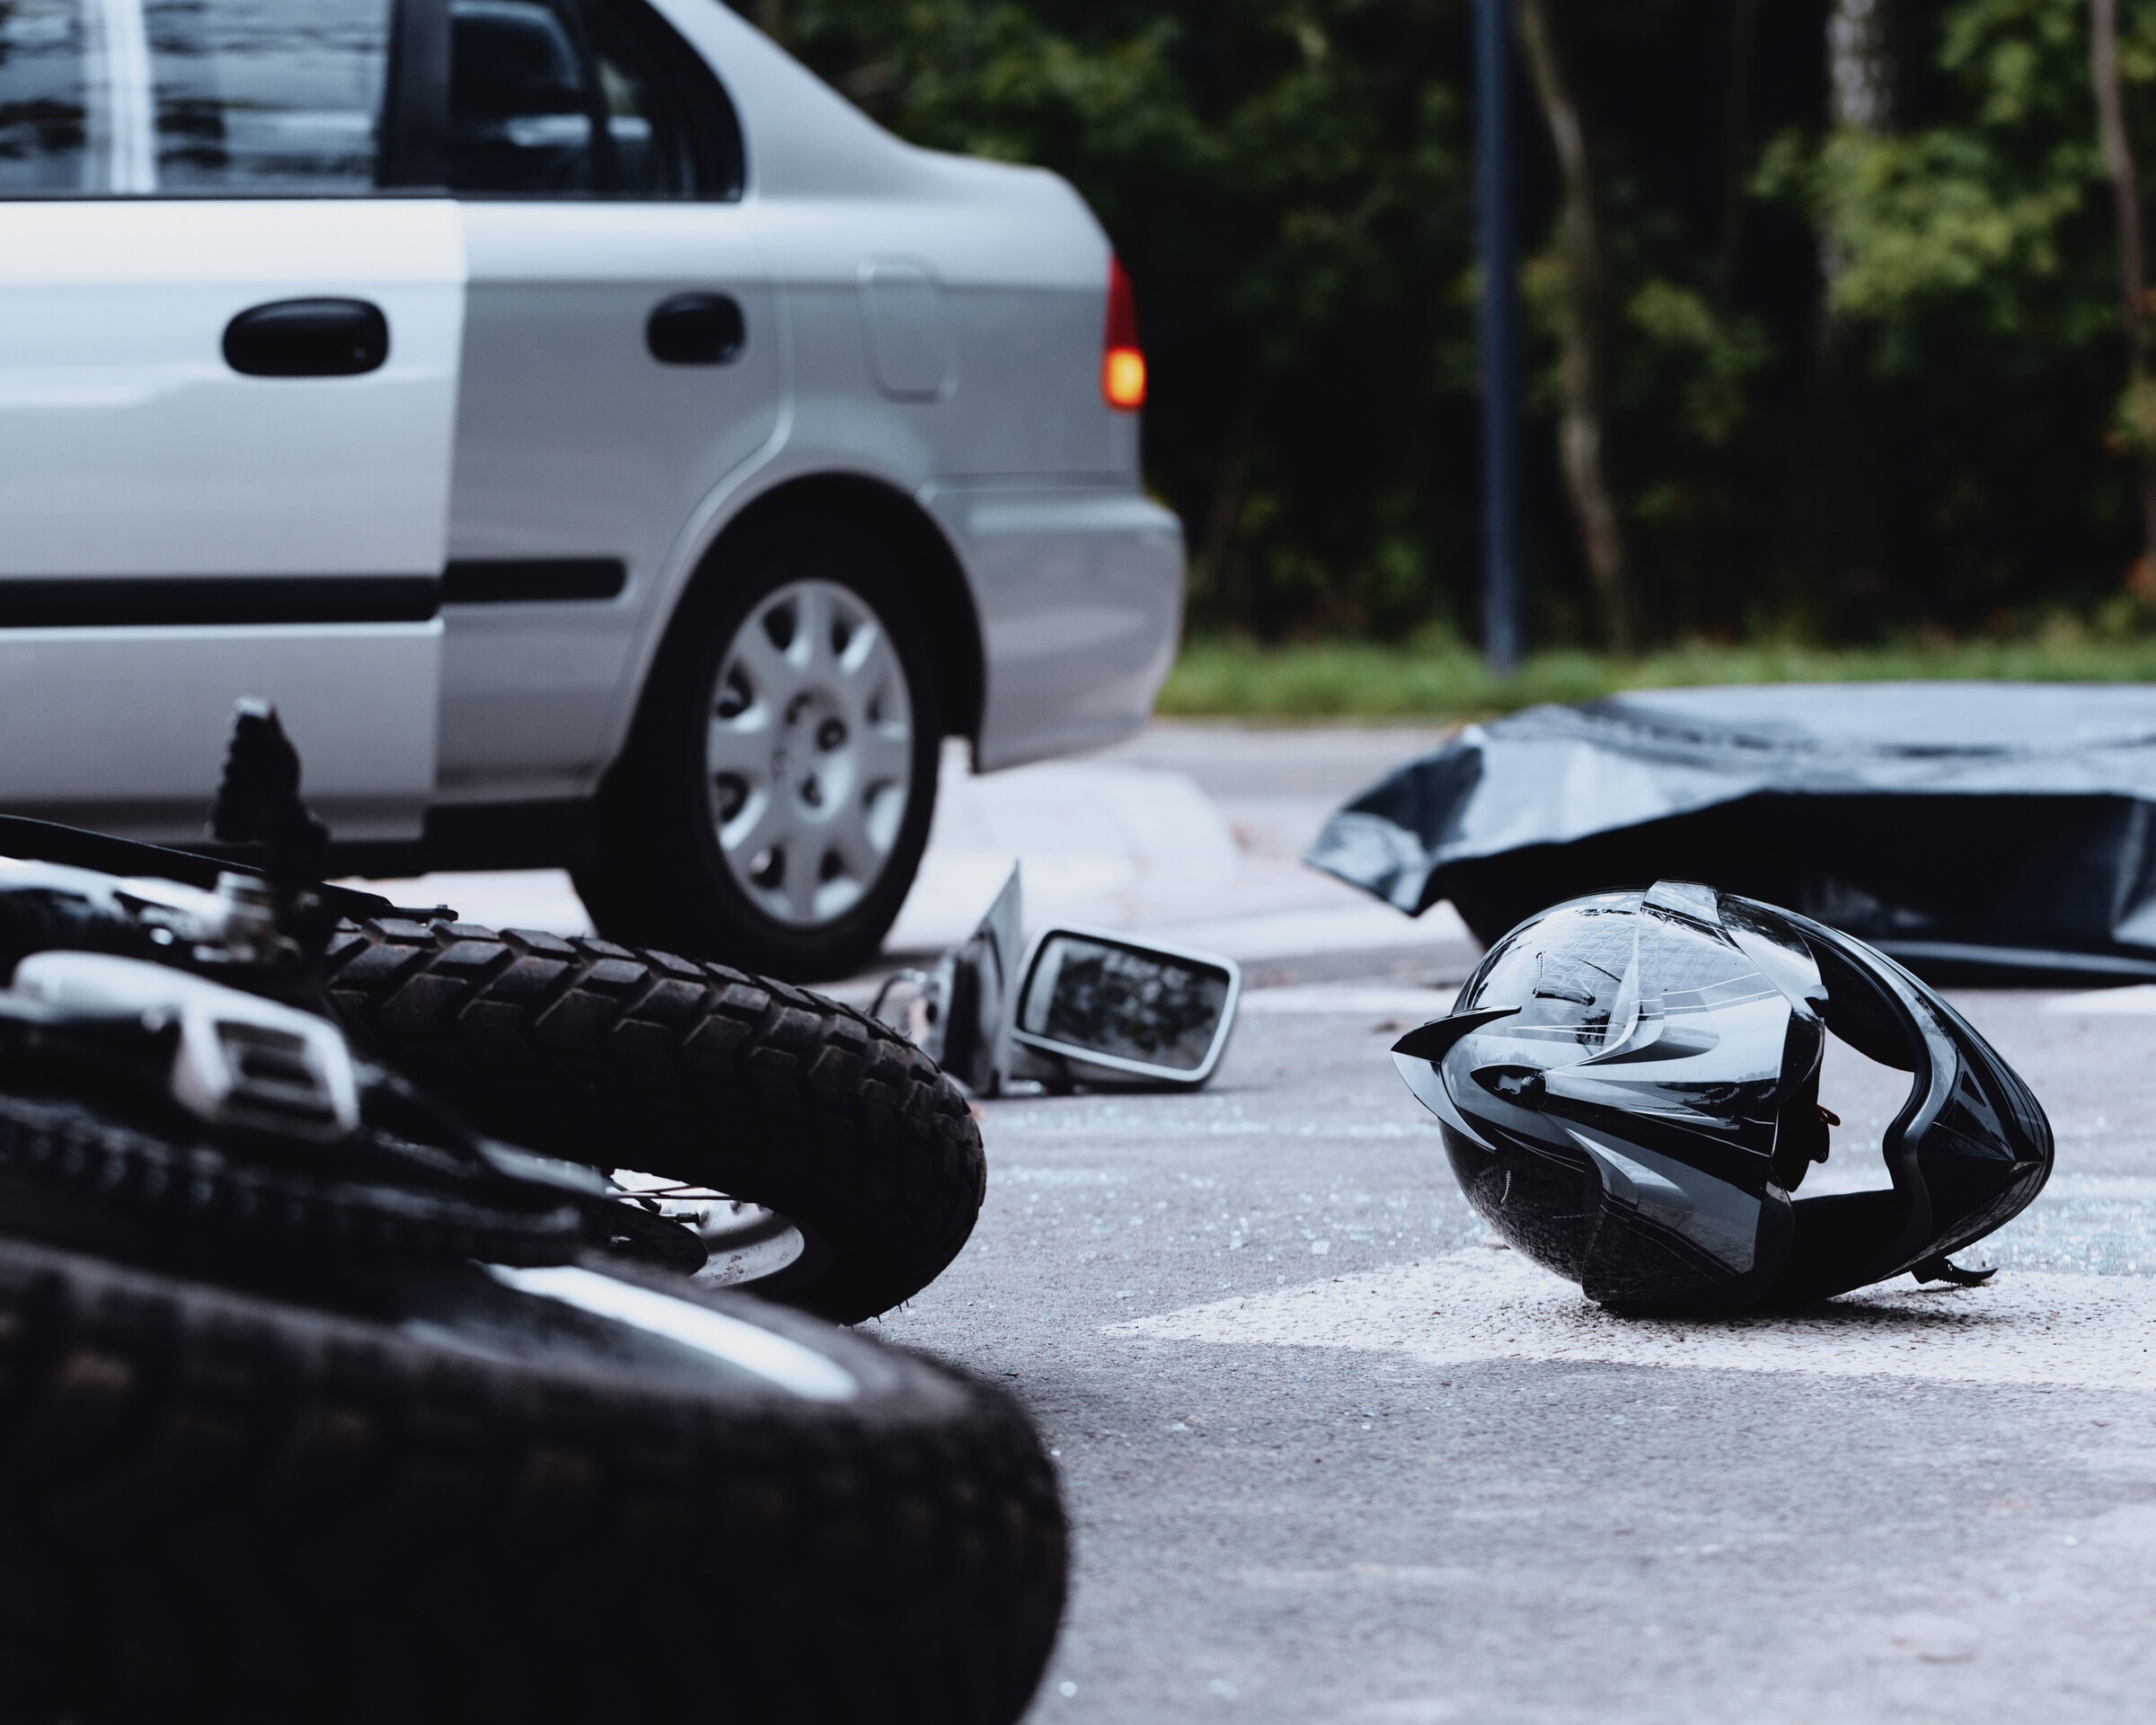 Reliable lawyers who are dedicated to providing support and guidance to those affected by car and motor vehicle accidents in Carmel